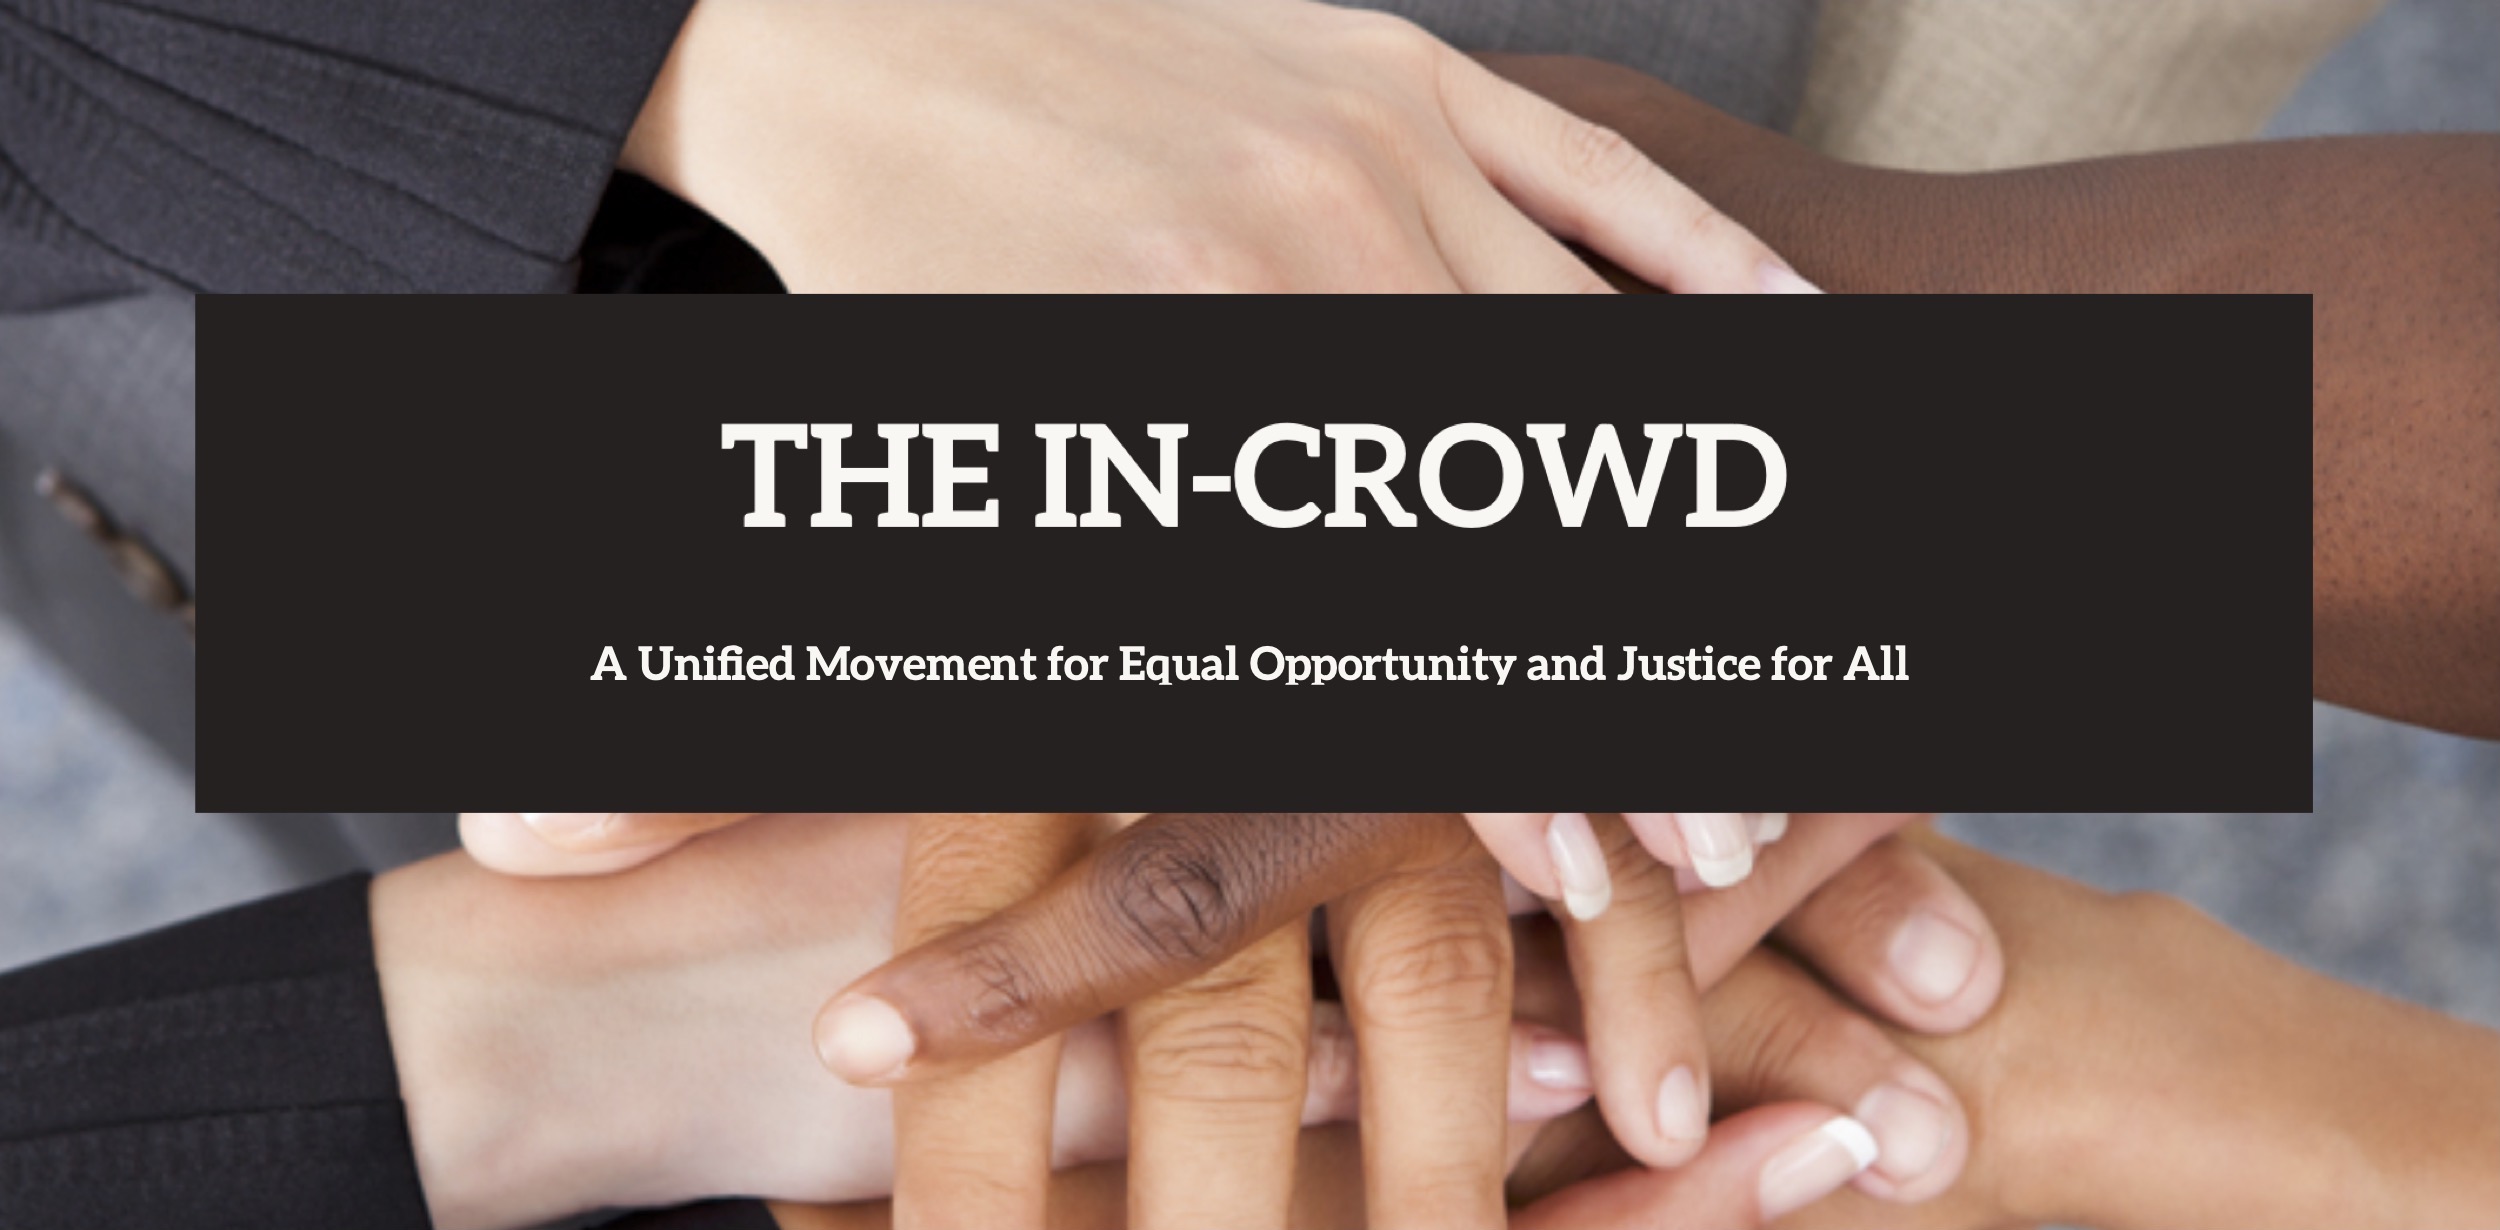 THE IN-CROWD: A Unified Movement for Equal Opportunity and Justice for All